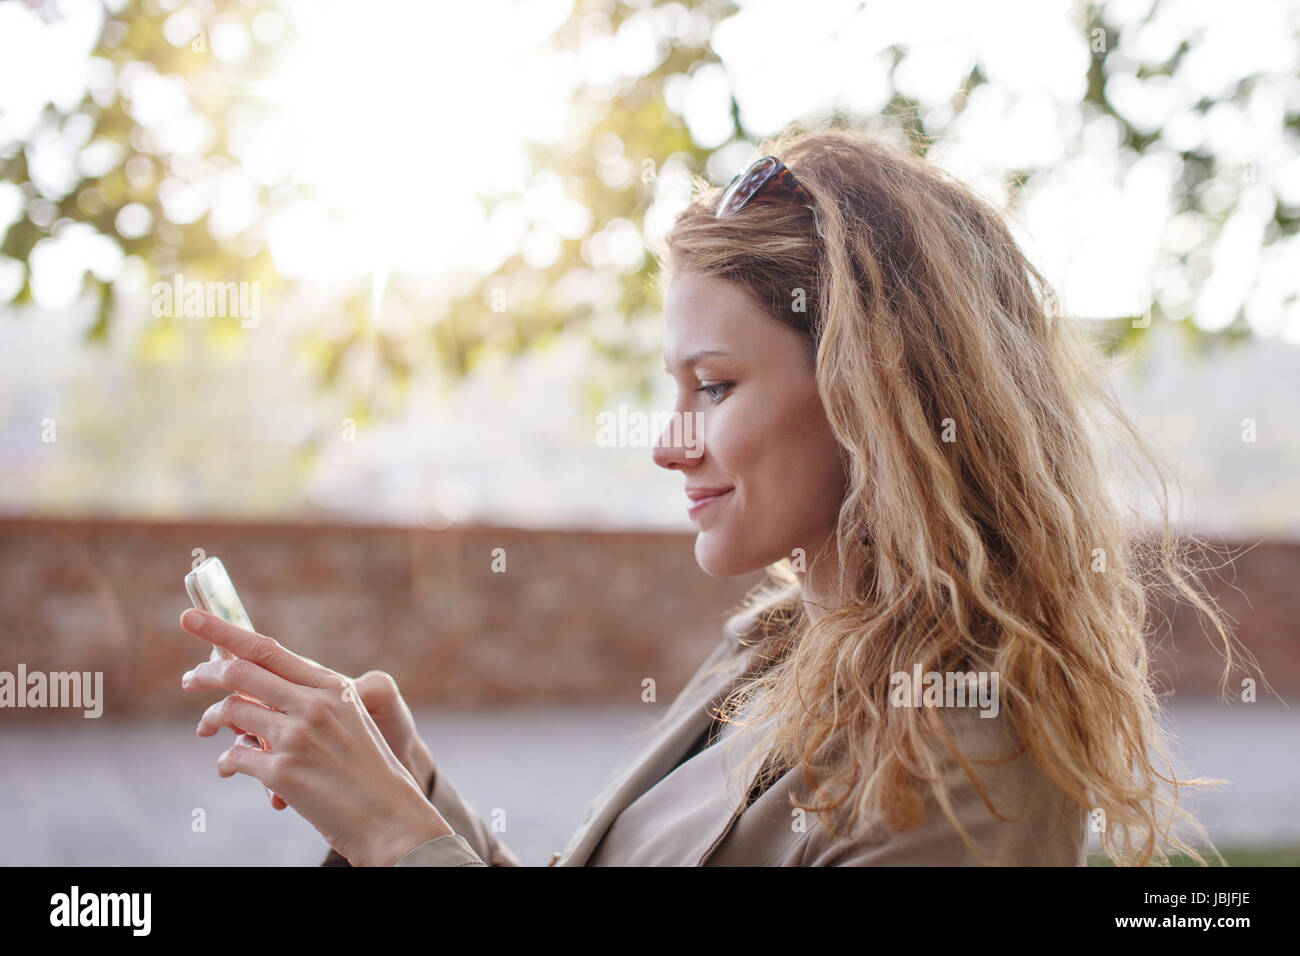 Woman messaging or playing on smartphone outdoor Stock Photo